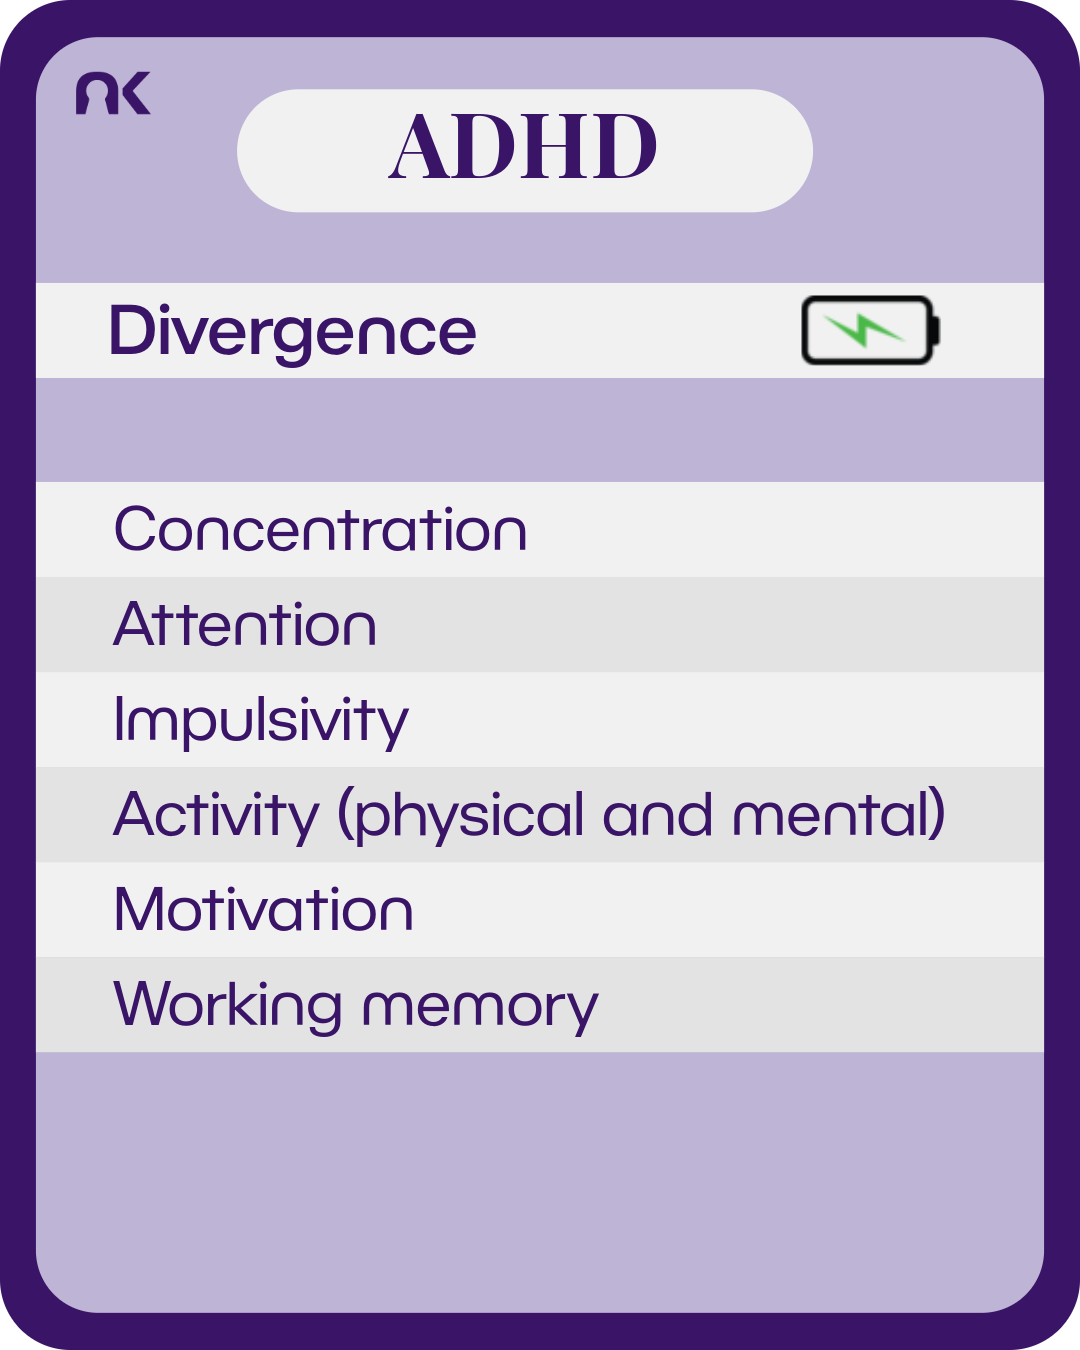 An information card made to look like it is from a card game. Next to the subtitle "divergence" is a battery with an electric bolt inside it. Text says"ADHD. Divergence. Concentration; Attention; Impulsivity; Activity (physical and mental); Motivation; Working memory."